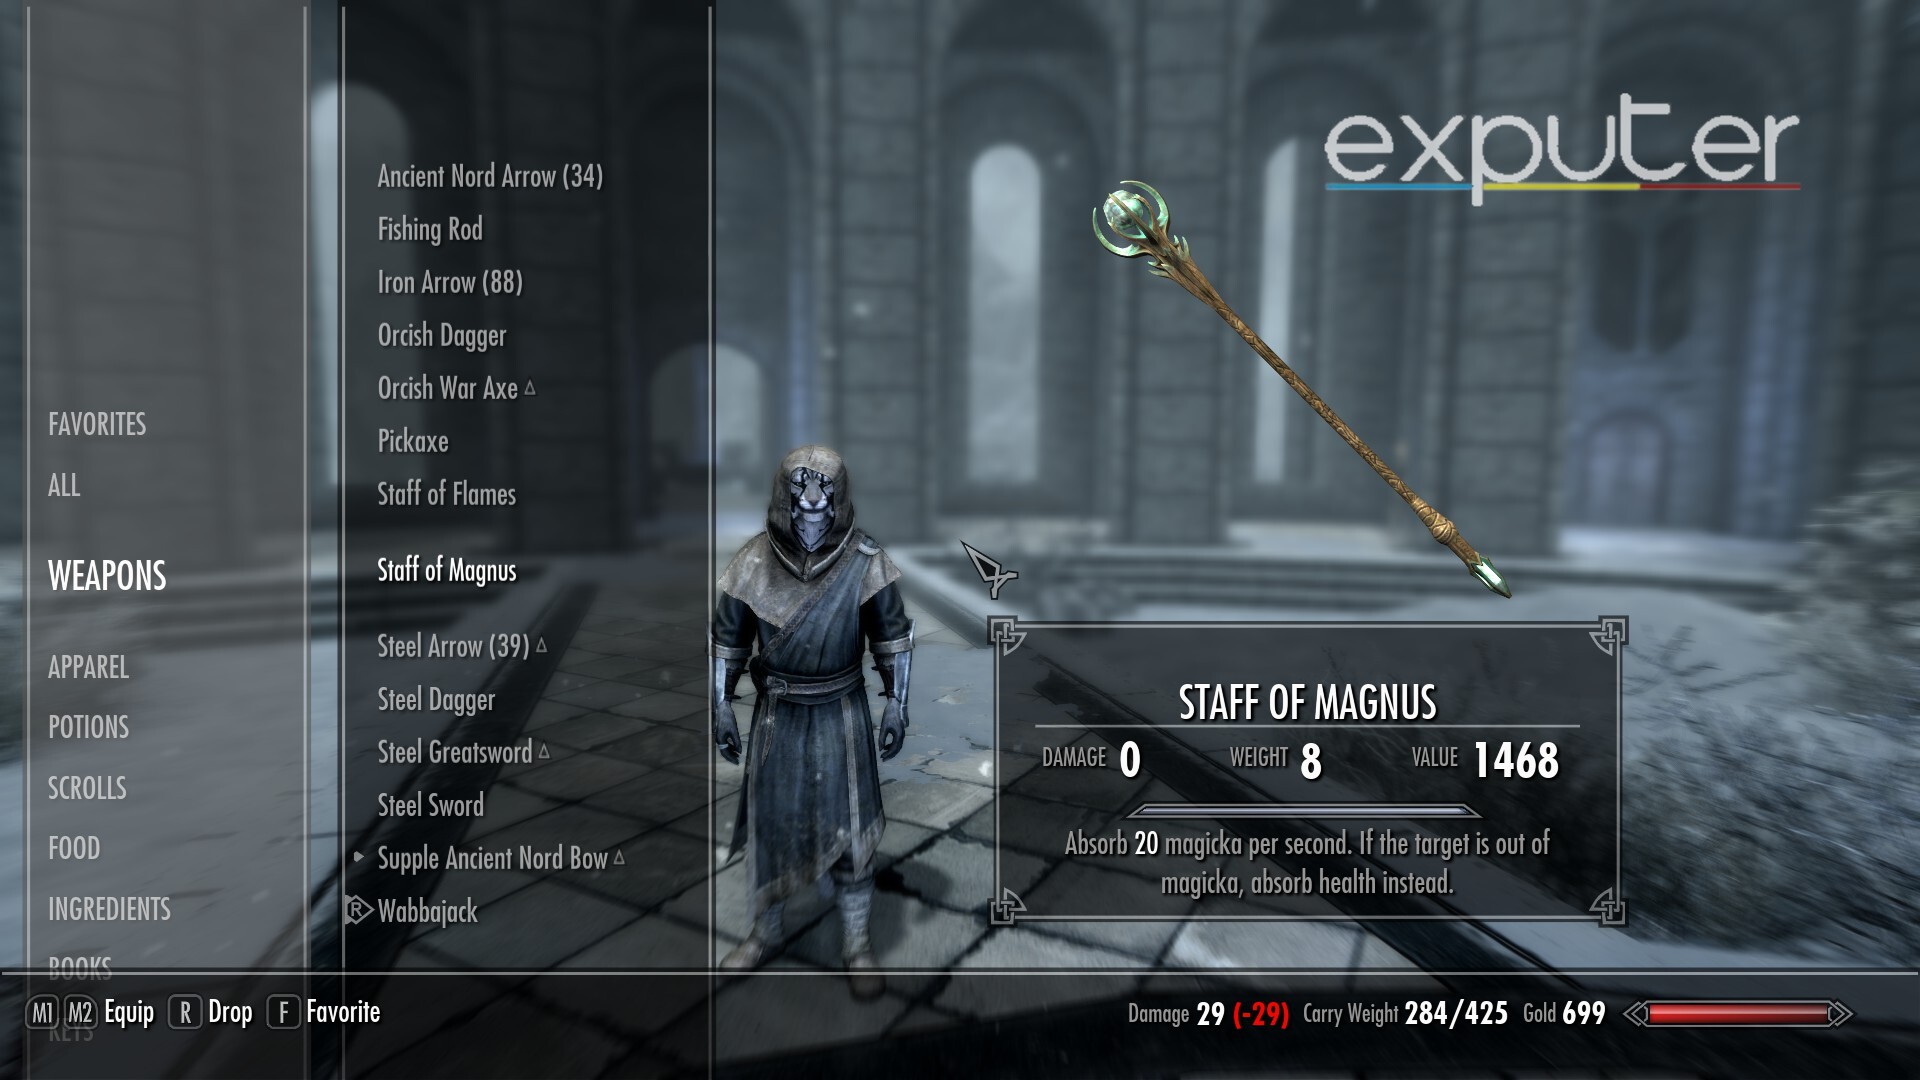 The mage gear in skyrim staff of magnus.